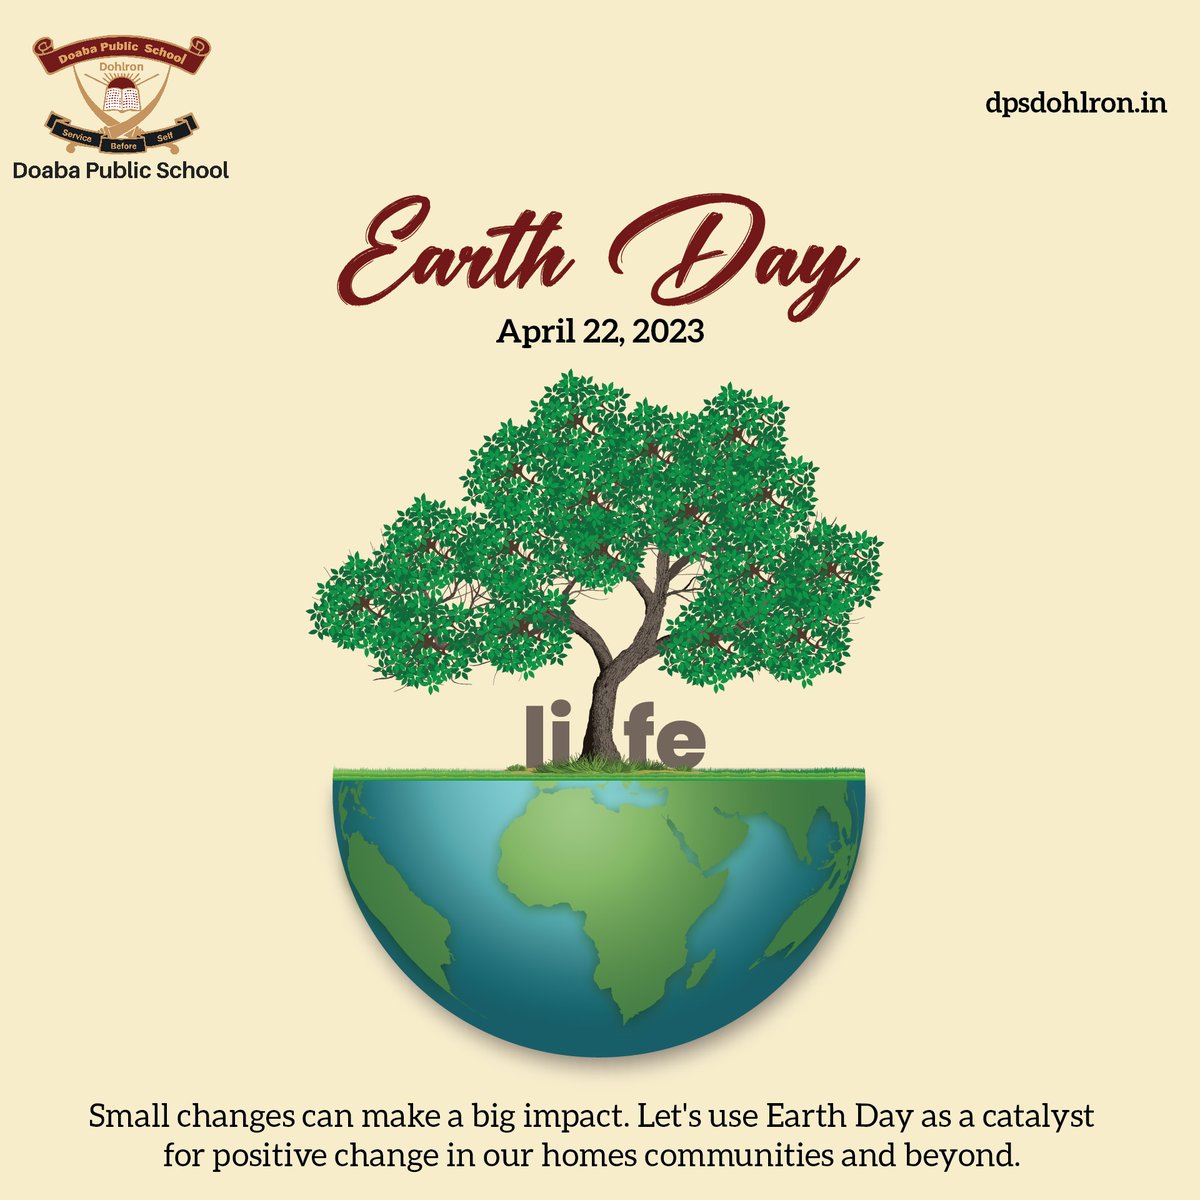 The Earth is a canvas, and we're all artists. Let's use our creativity to make this world a more beautiful and sustainable place🌍💚

#ArtForEarth #NatureIsMagic #EarthDay #DoabaPublicSchool #SchoolInMahilpur #ServiceBeforeSelf #ComprehensiveEducation #Education #School